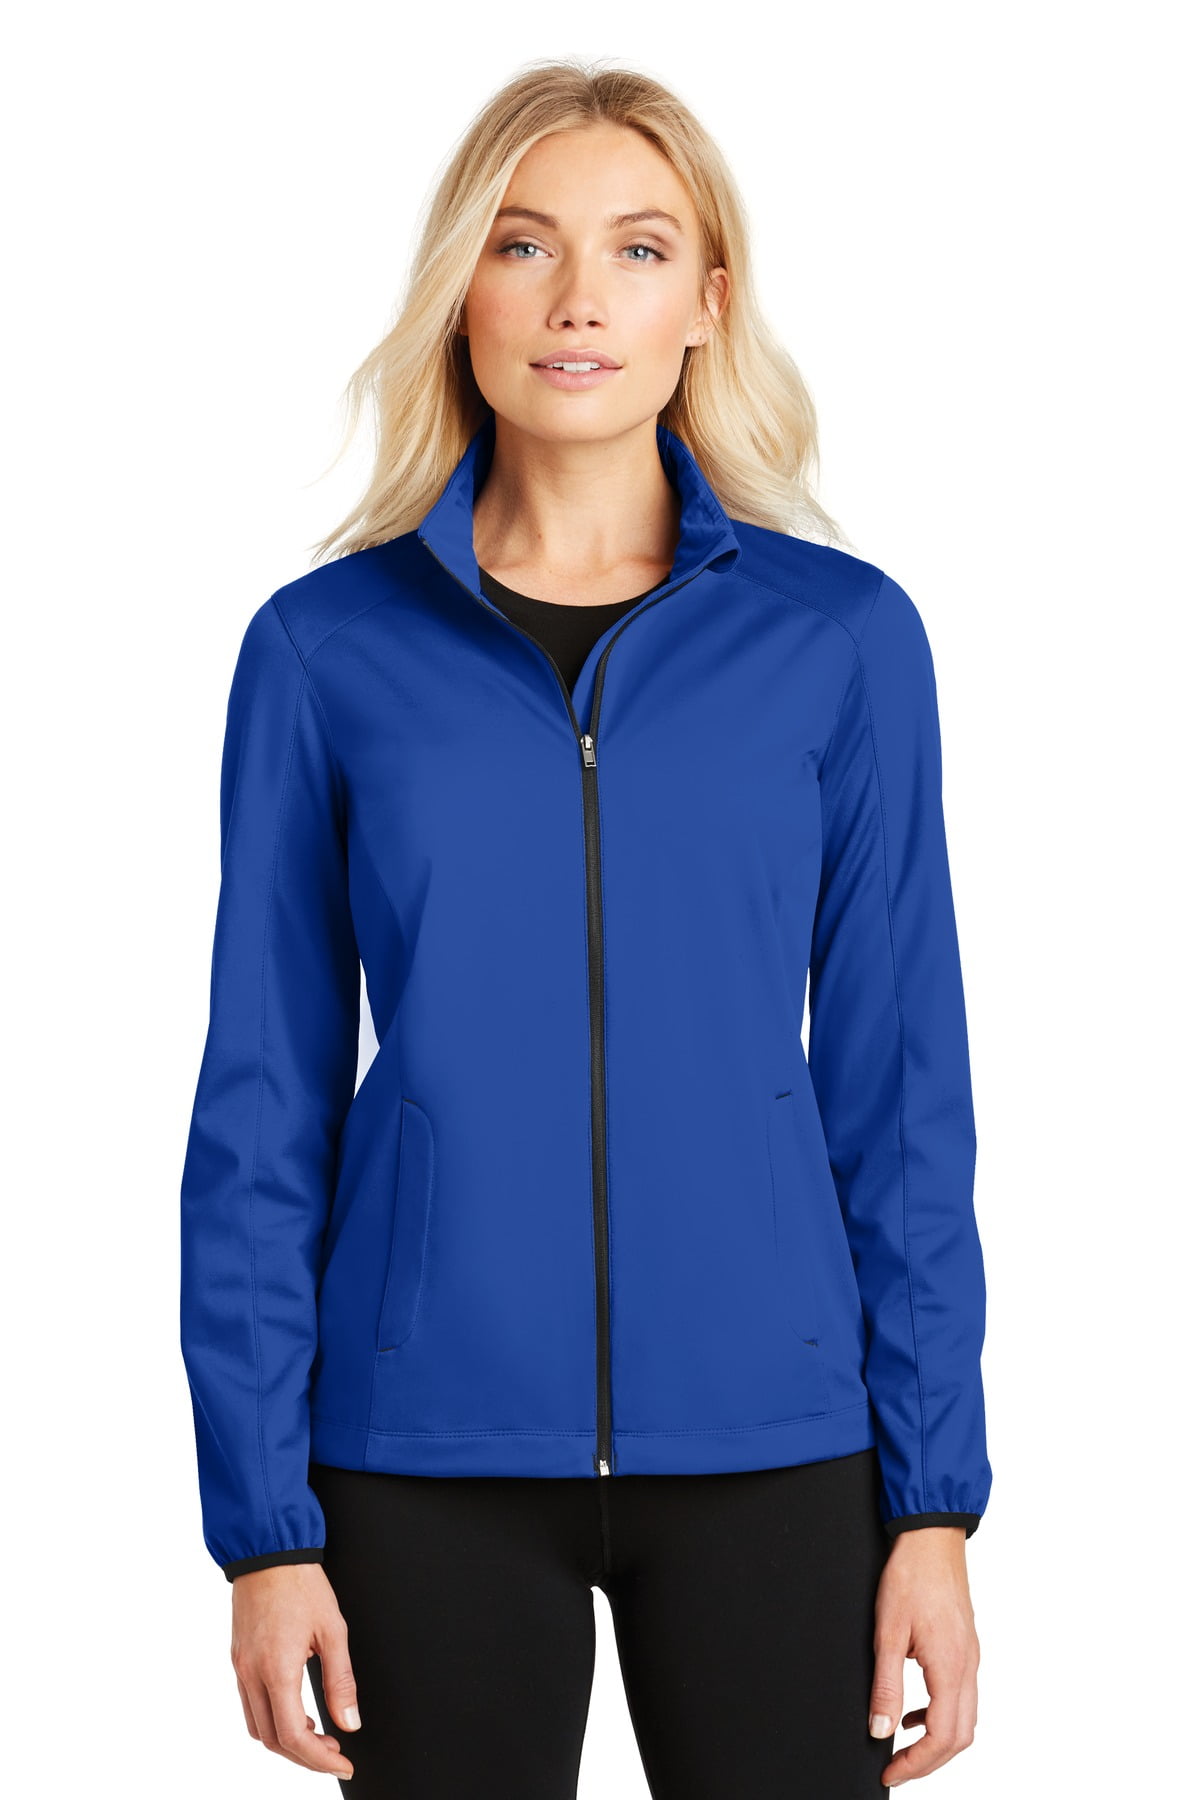 Port Authority Ladies Active Soft Shell Jacket-L717-S